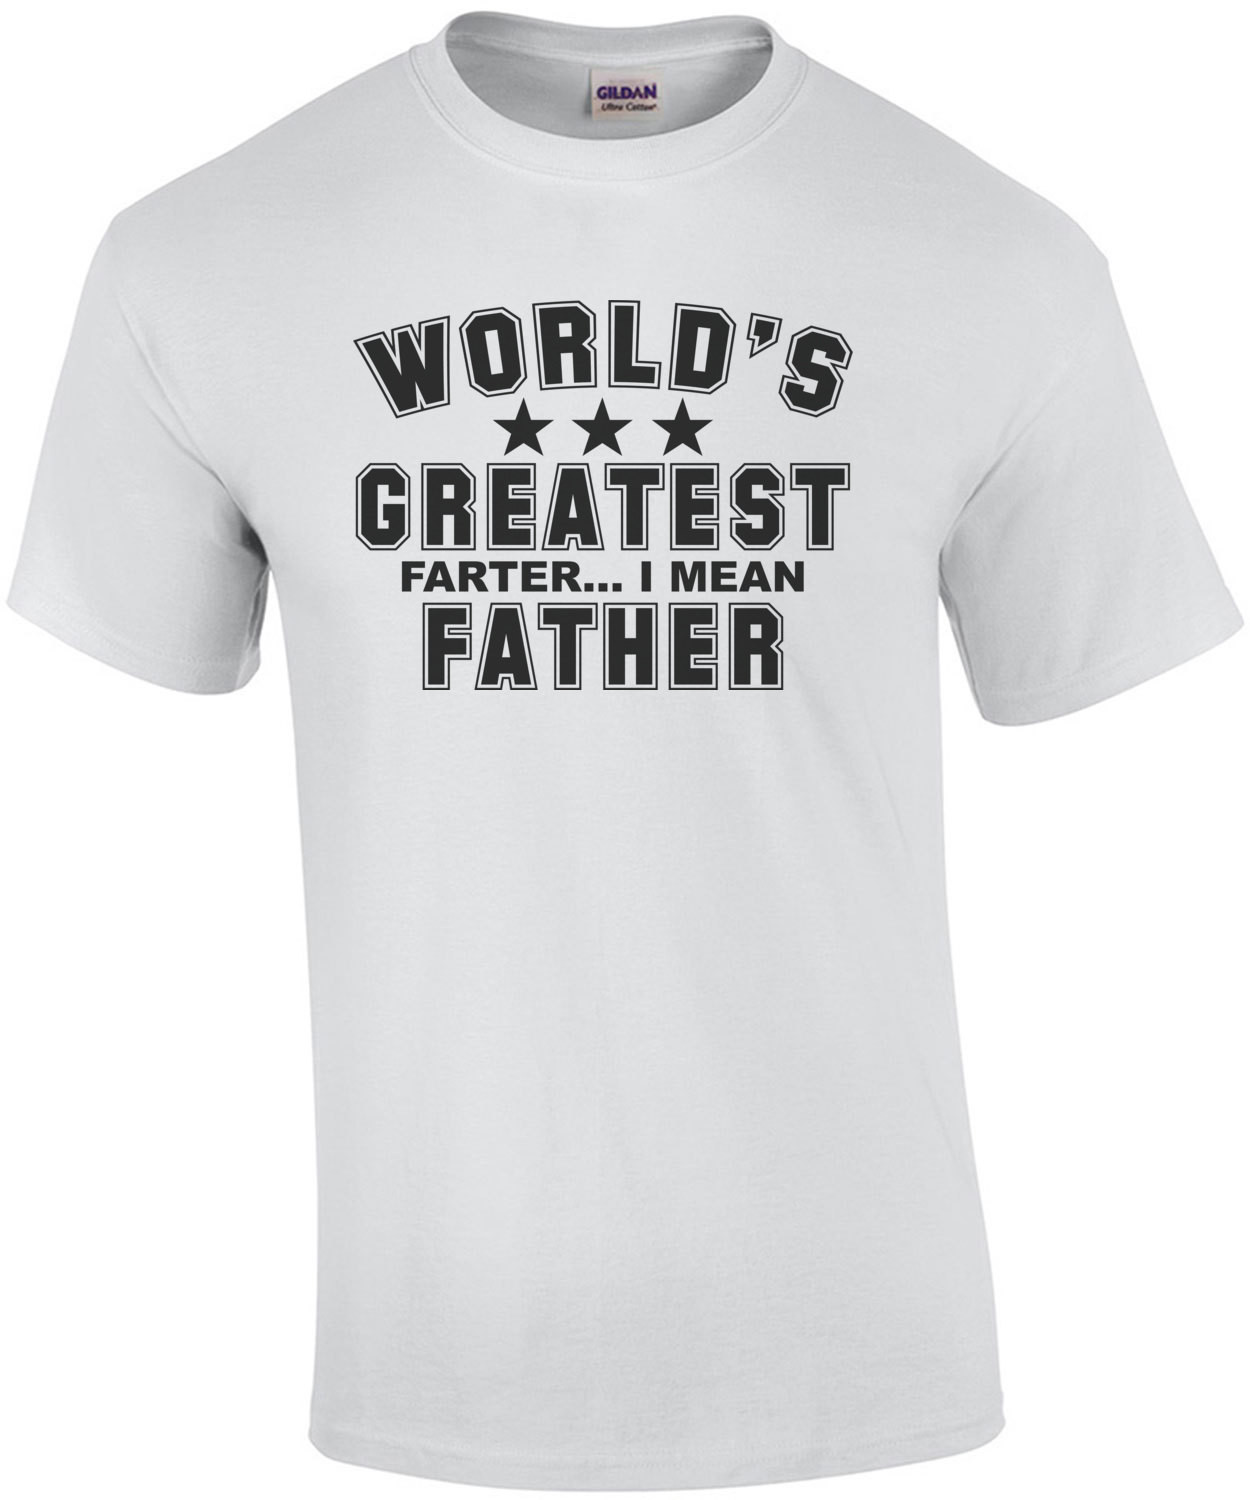 World's Great Farter... I mean Father